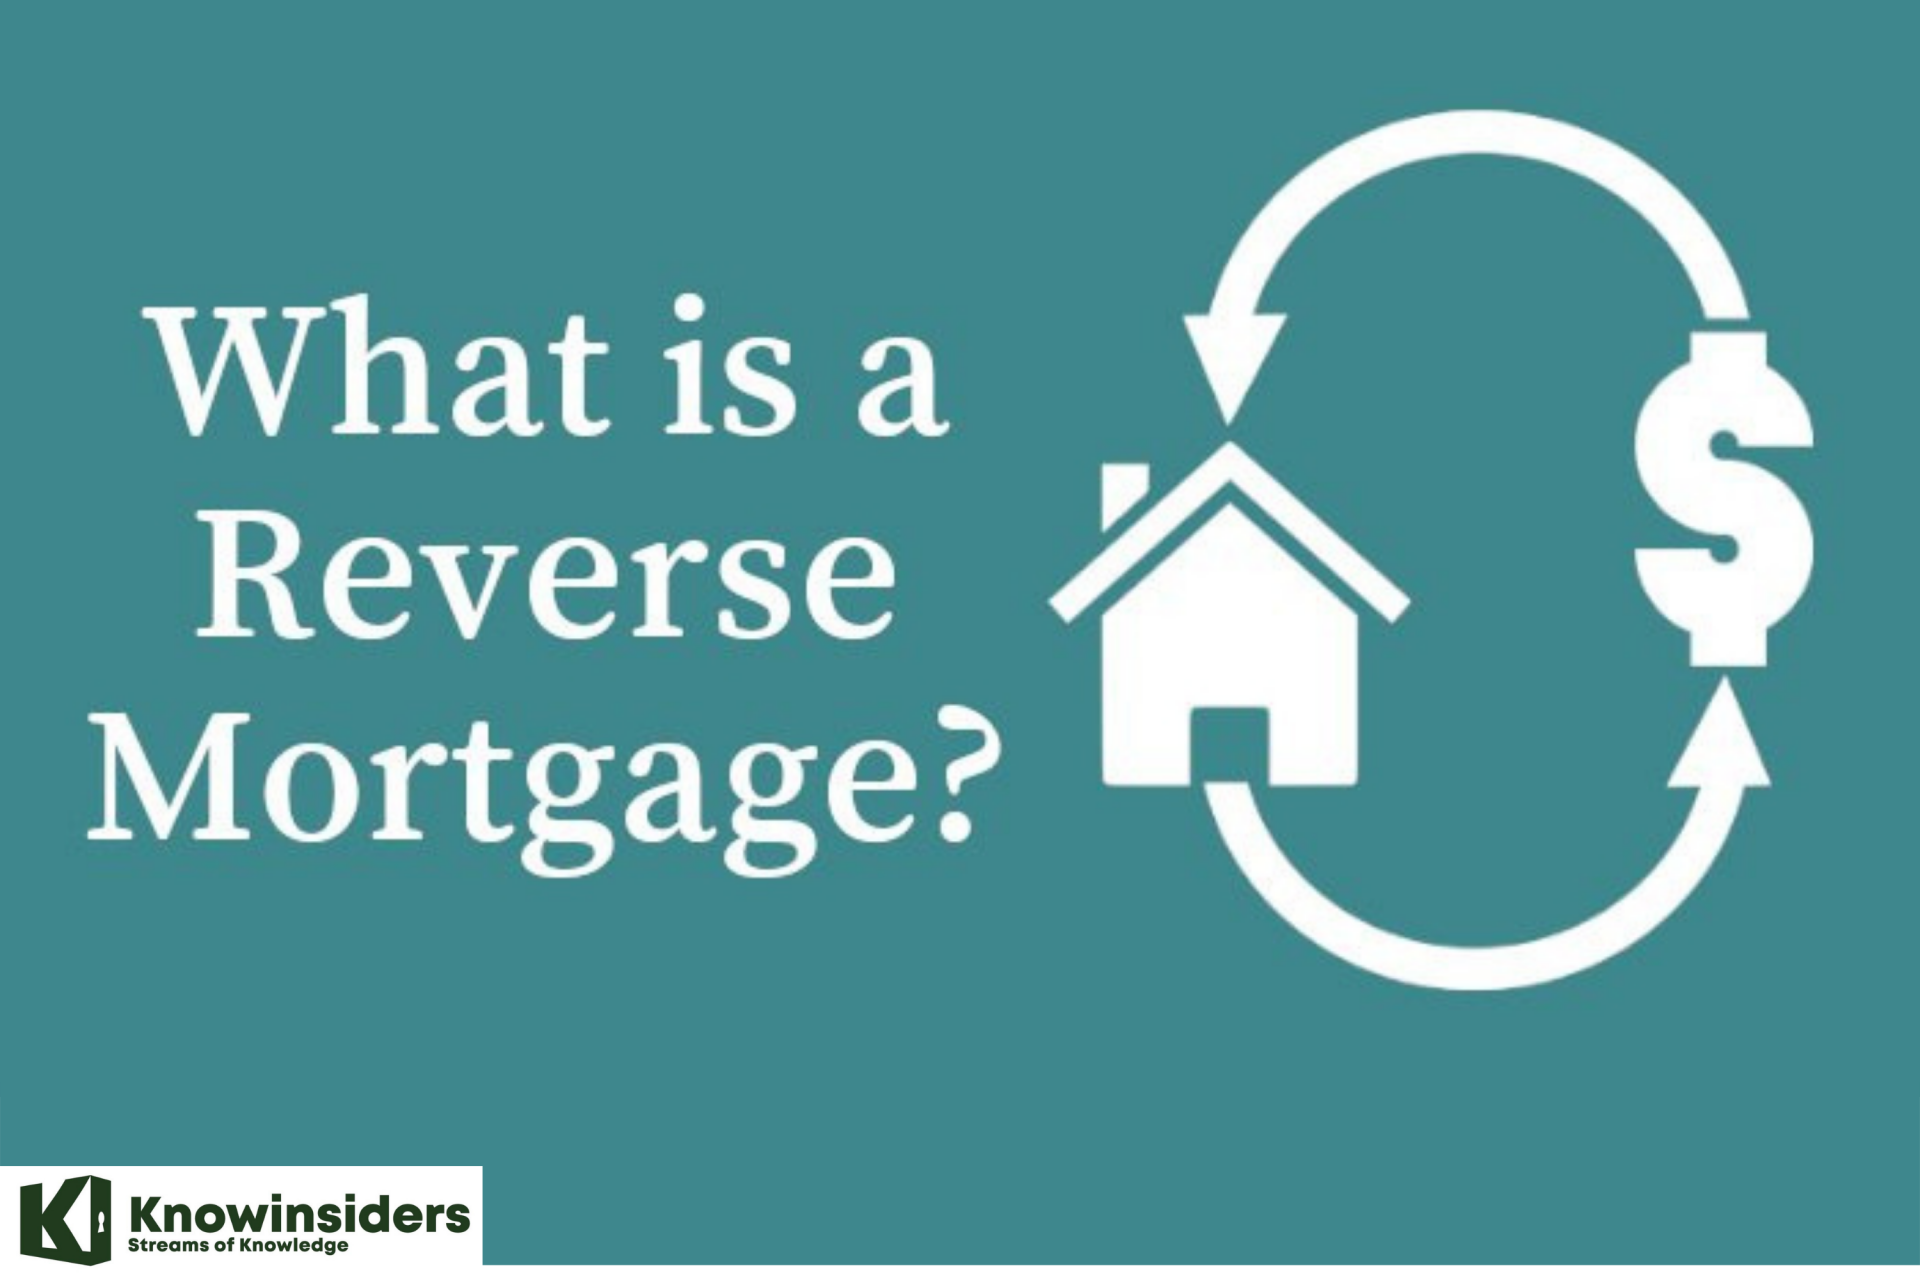 What Is A Reverse Mortgage And How Does A Reverse Mortgage Work?